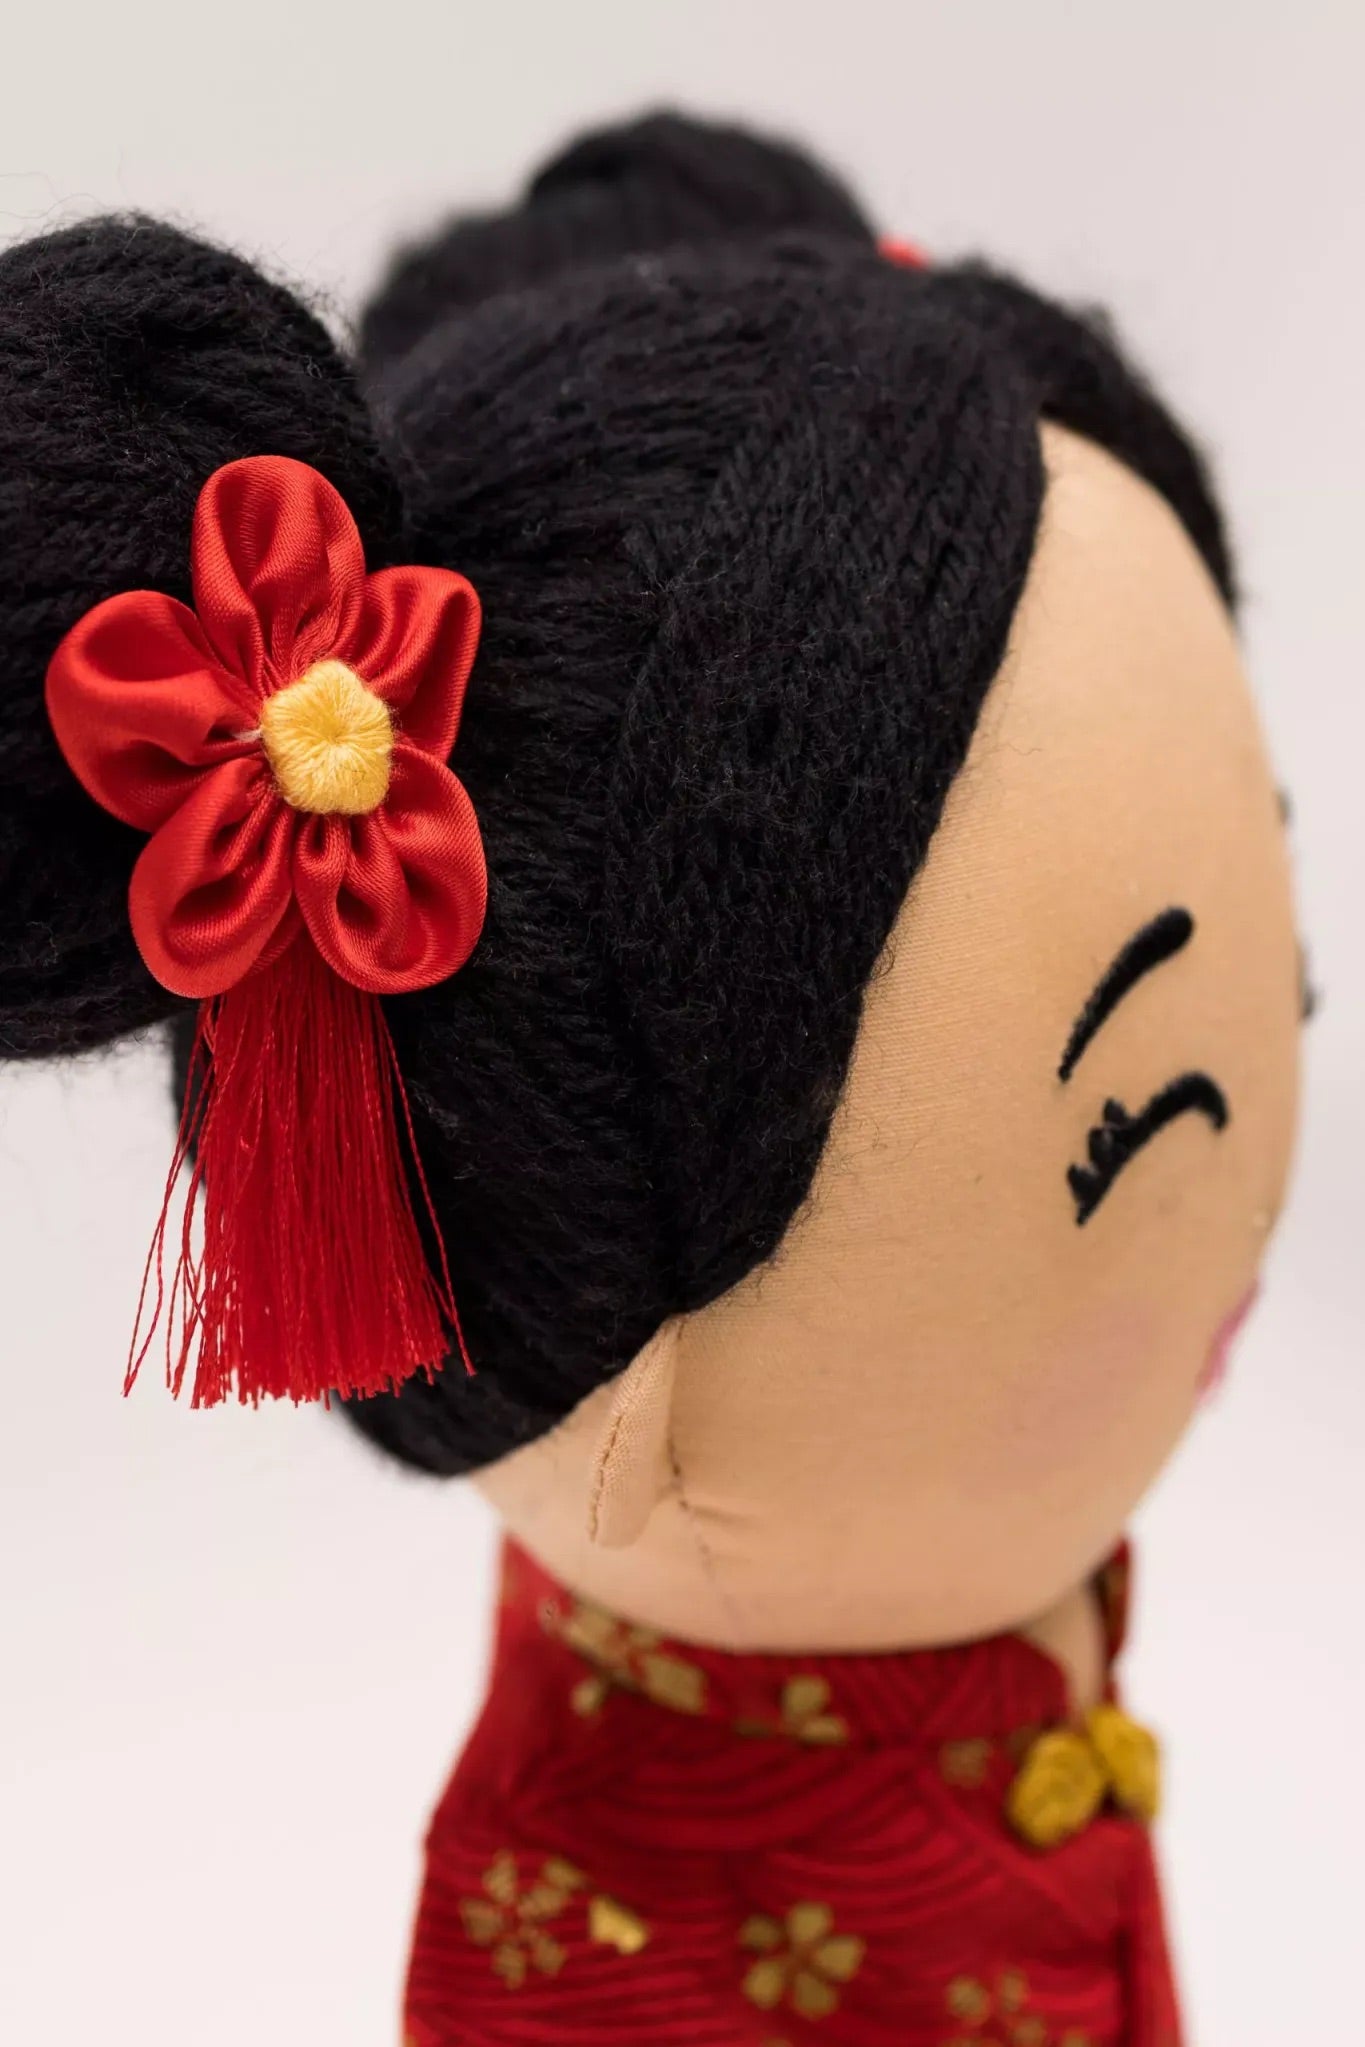 Chinese 'Mei' Cultural Doll